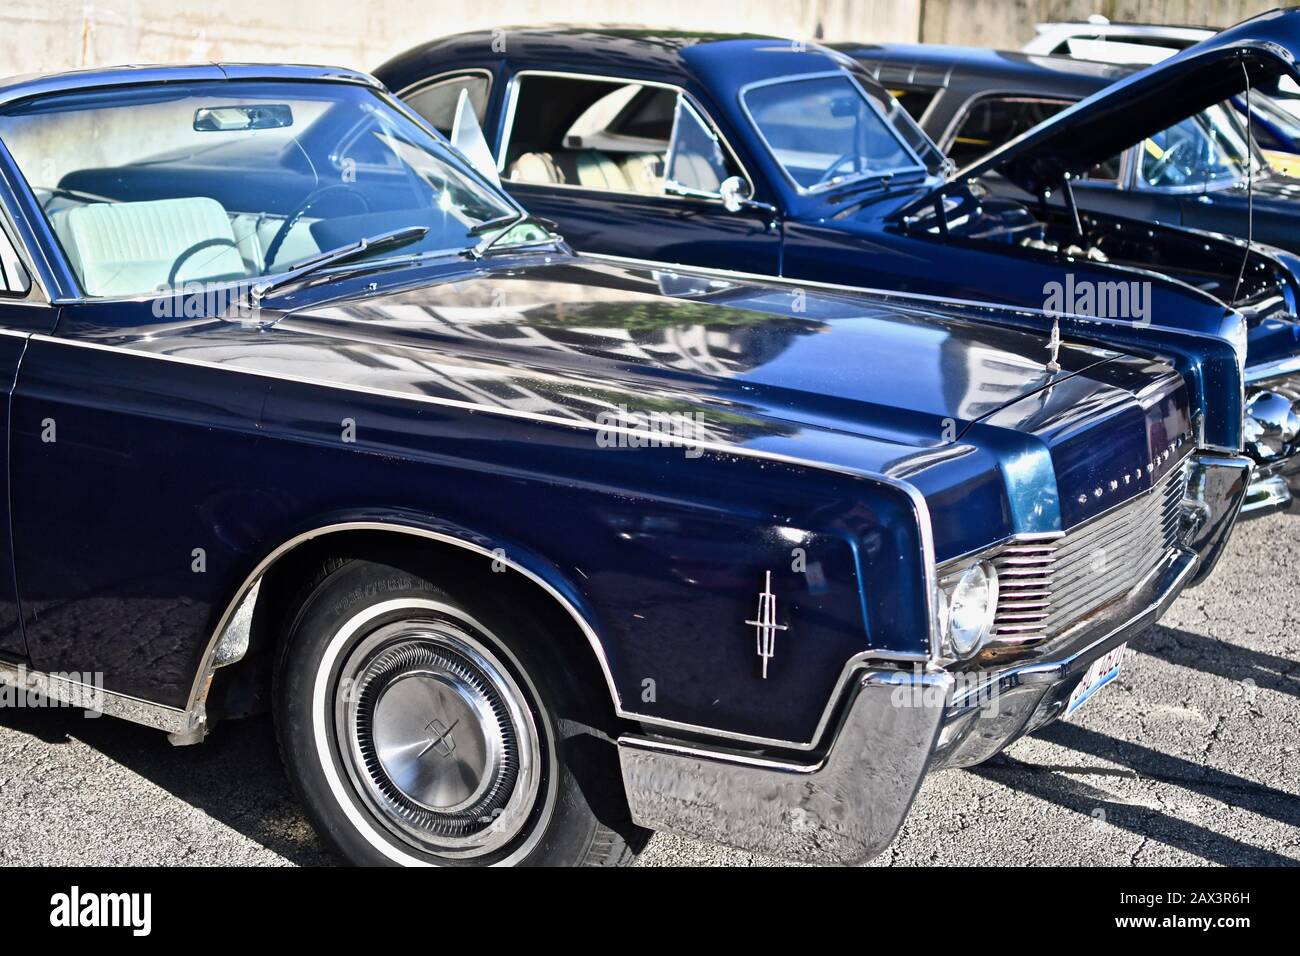 DOWNERS GROVE, UNITED STATES - Jun 07, 2019: The blue Lincoln continental mark v during the Downers Grove Car Show - Friday Night Lights Stock Photo